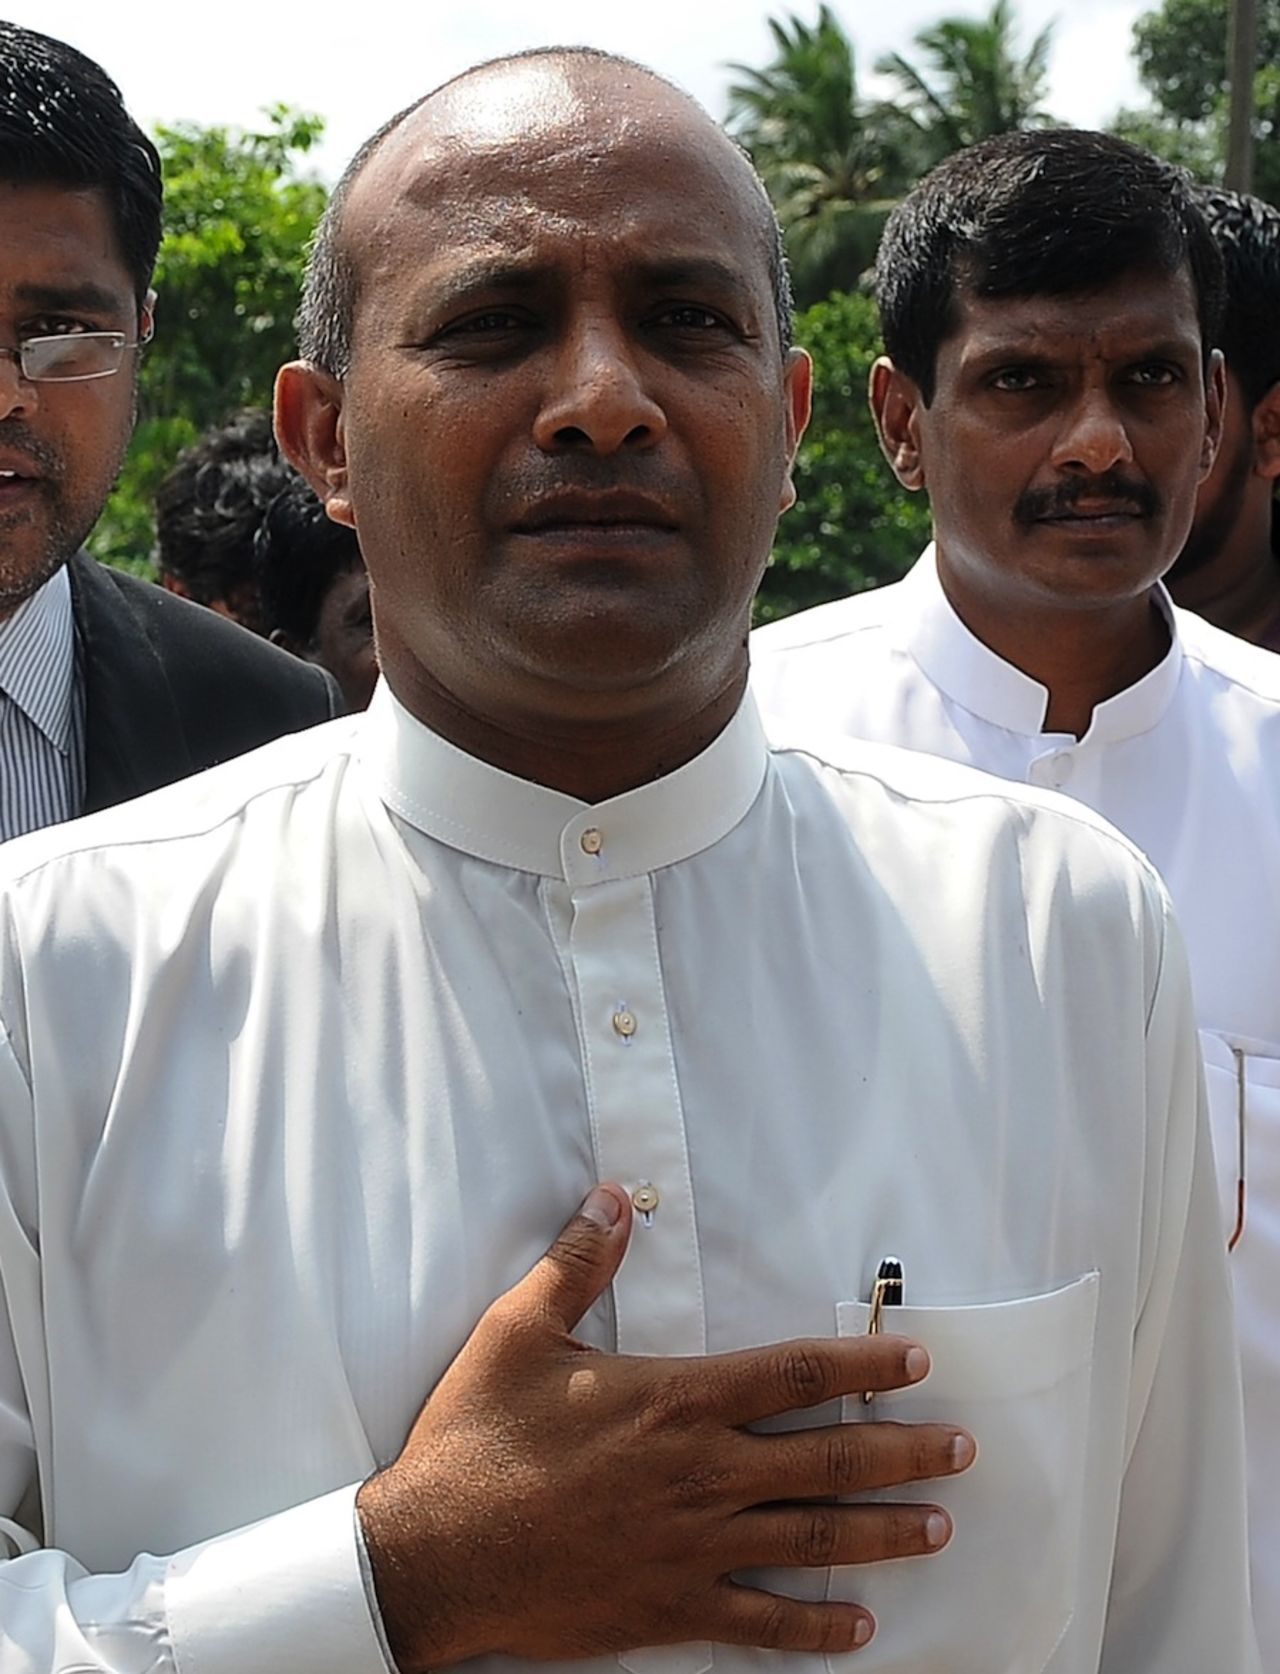 Hashan Tillakaratne in Colombo, where he was asked about his comments on match-fixing, May 3, 2011